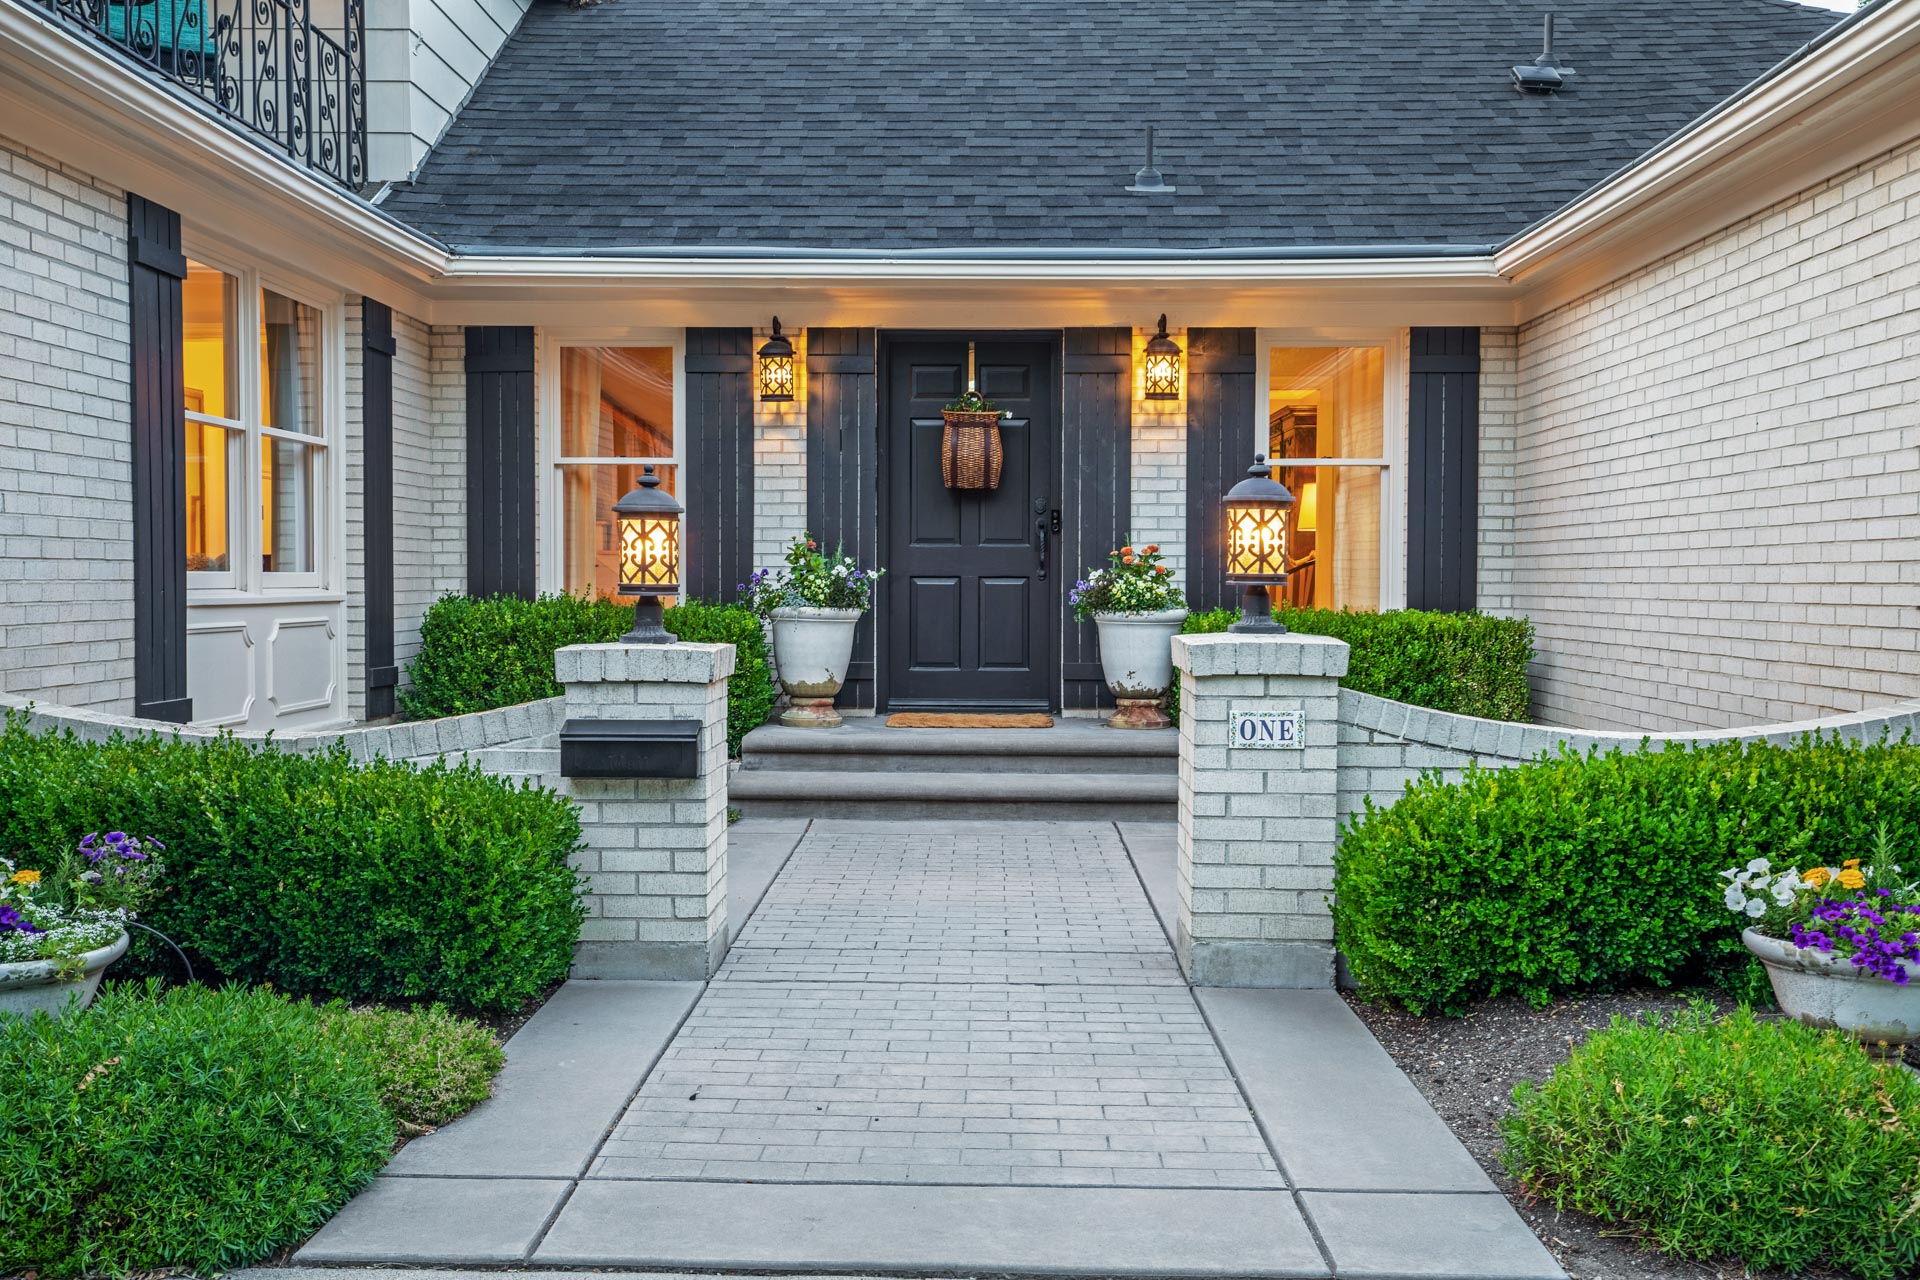 An inviting house entrance with a black door, symmetrical porch lights, and well-manicured landscaping featuring aspen maintenance.